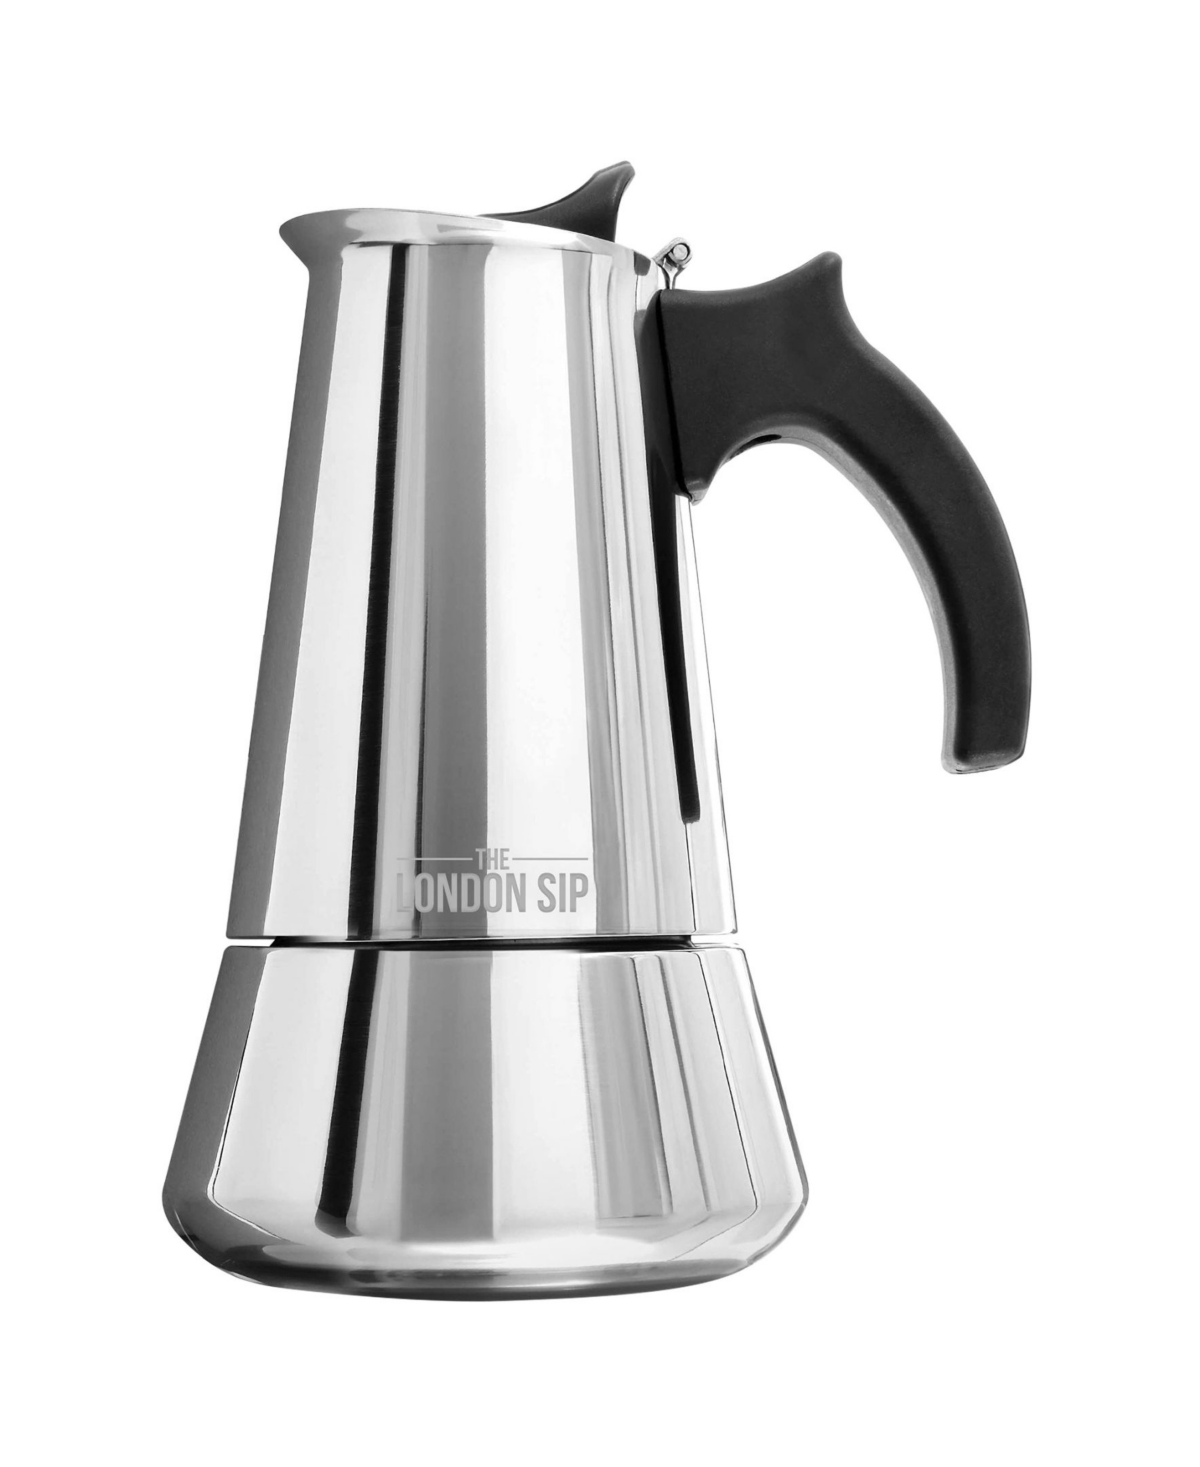 London Sip Stainless Steel Coffee Maker 6-cup In Silver